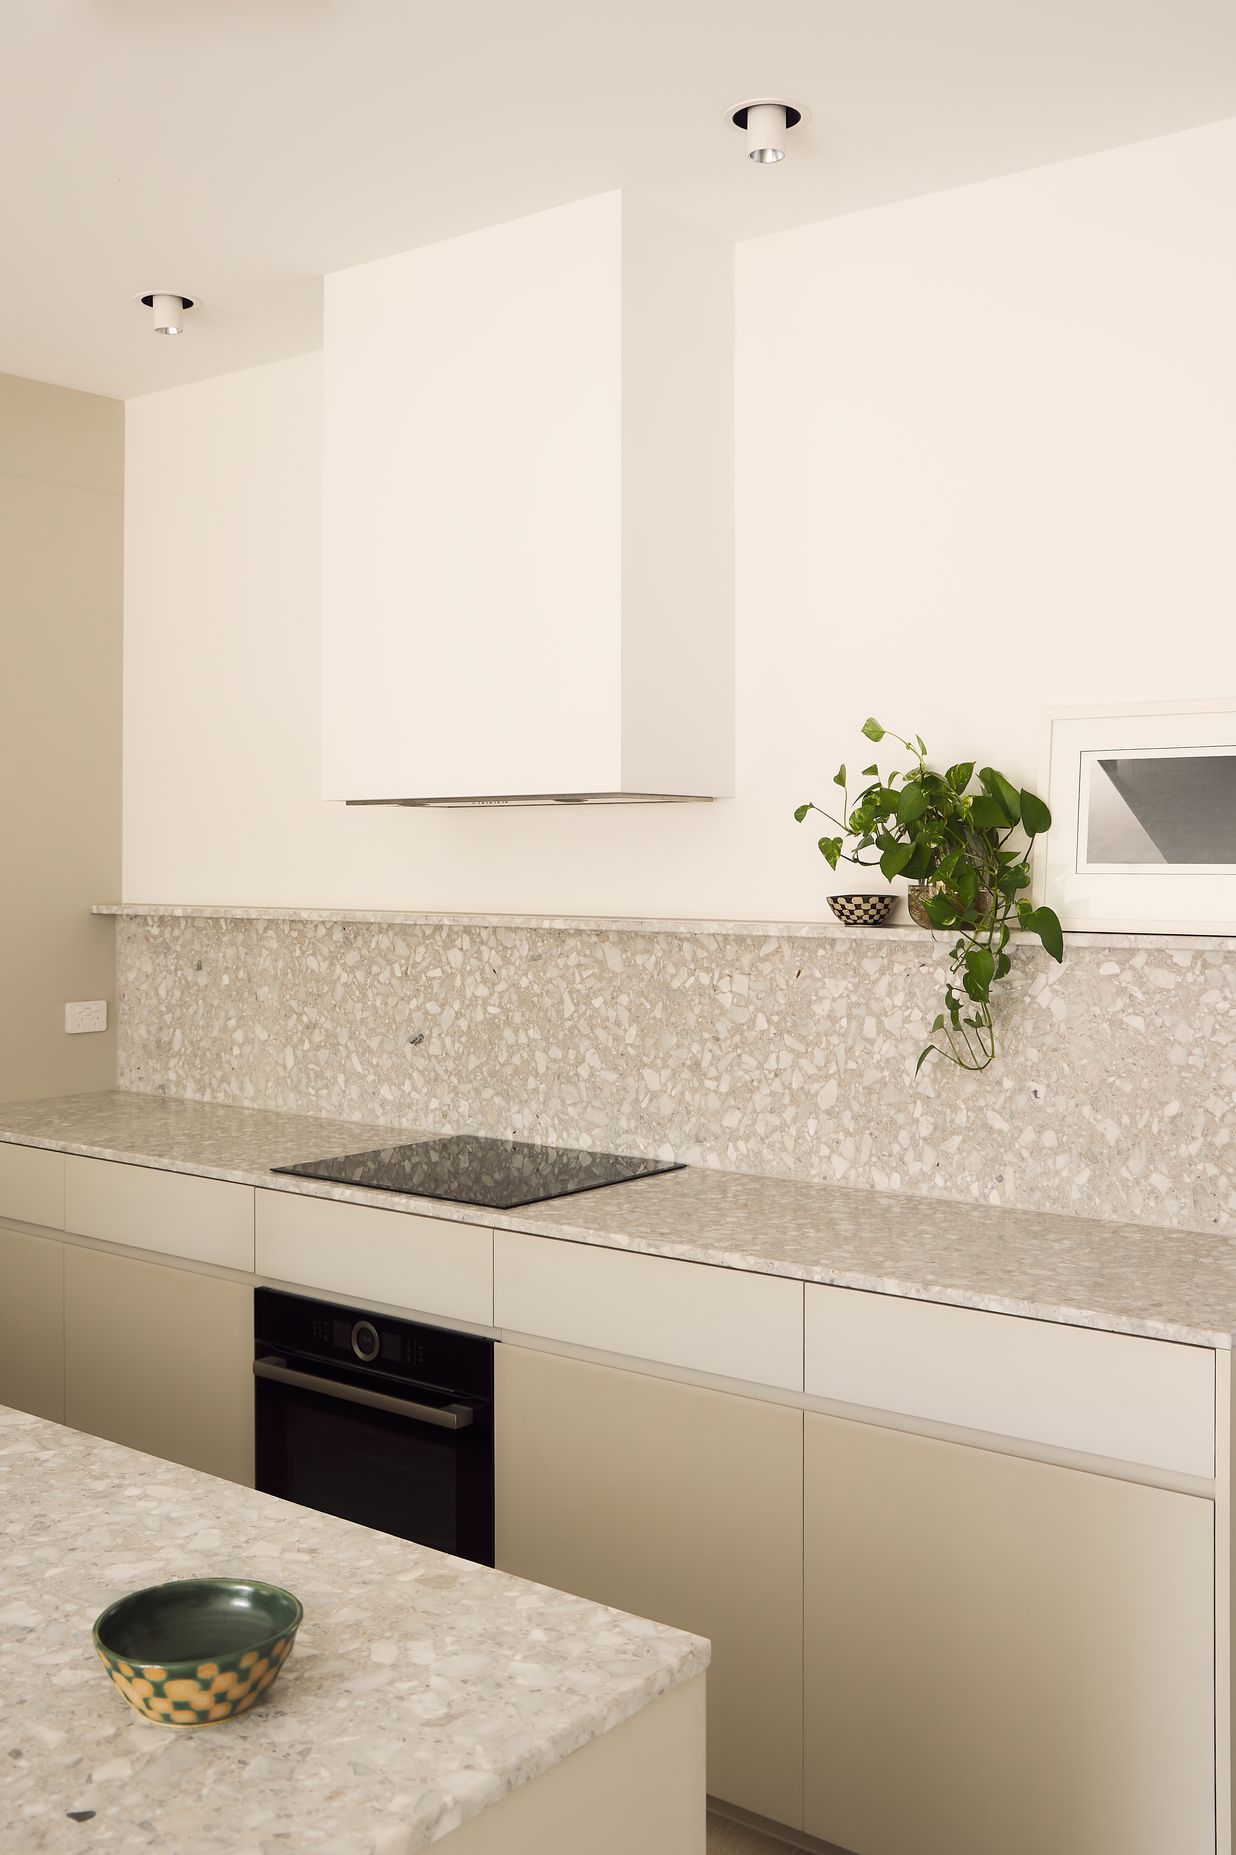 Warm white tones foster a calming ambience in the active lower storey of the house, with textured terrazzo and integrated appliances completing the kitchen and butler’s pantry.